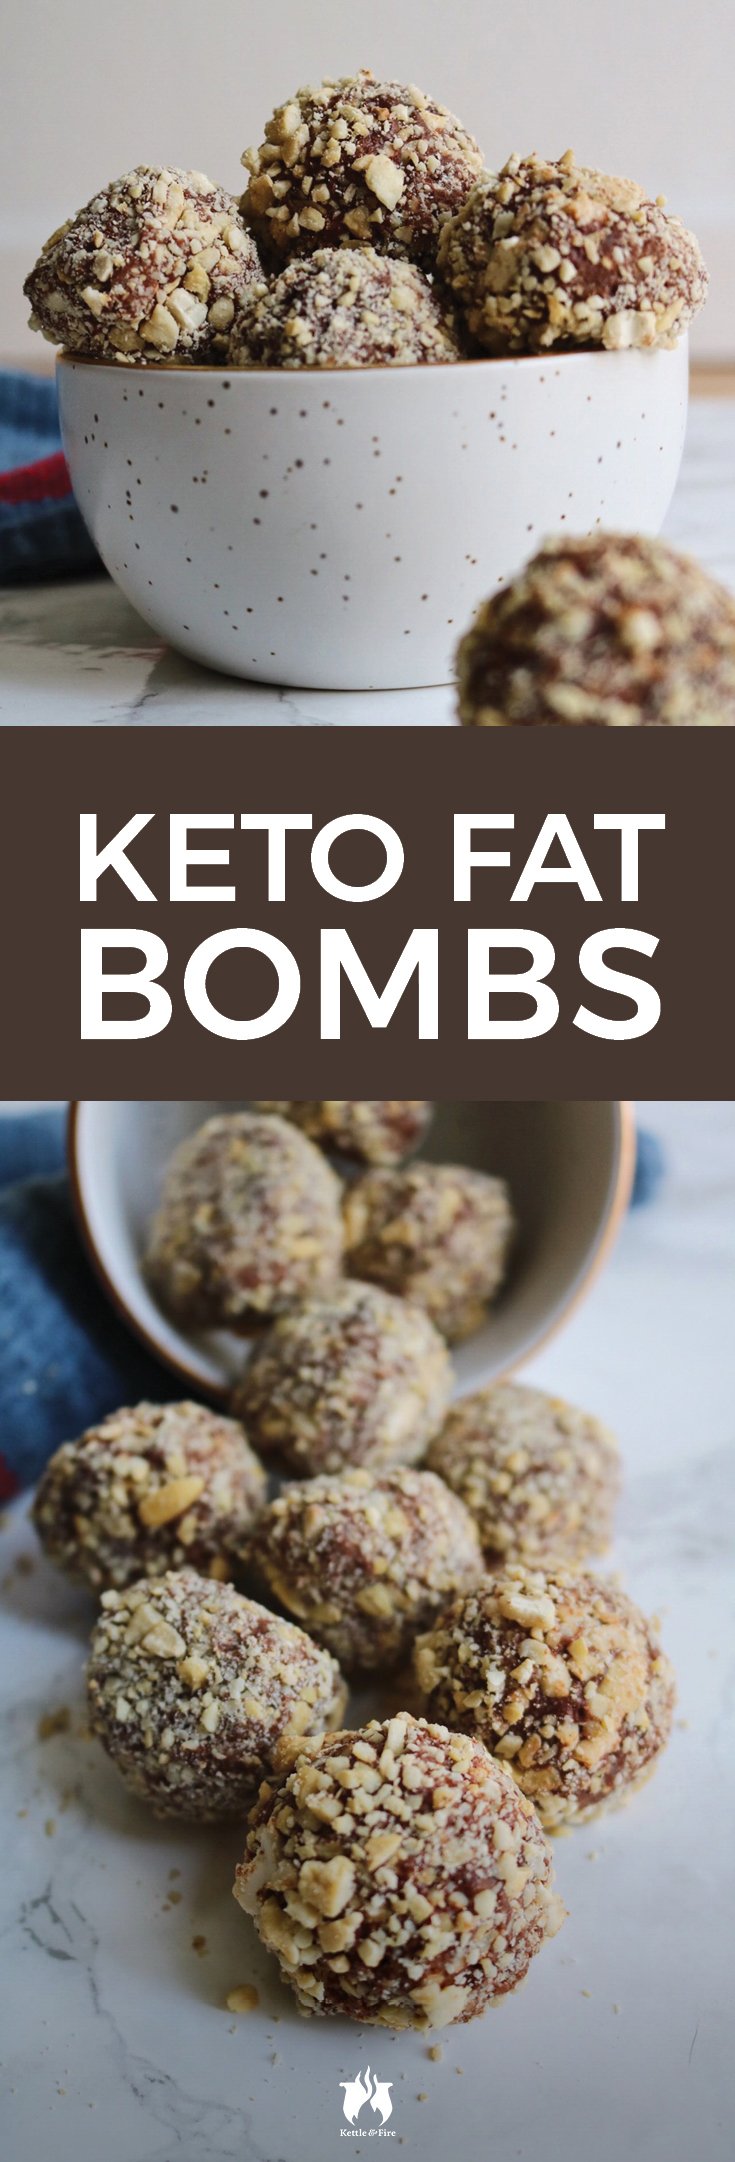 With a truffle-like texture and perfect amount of crunch, these keto fat bombs will help you meet the daily fat requirements needed to stay in ketosis.